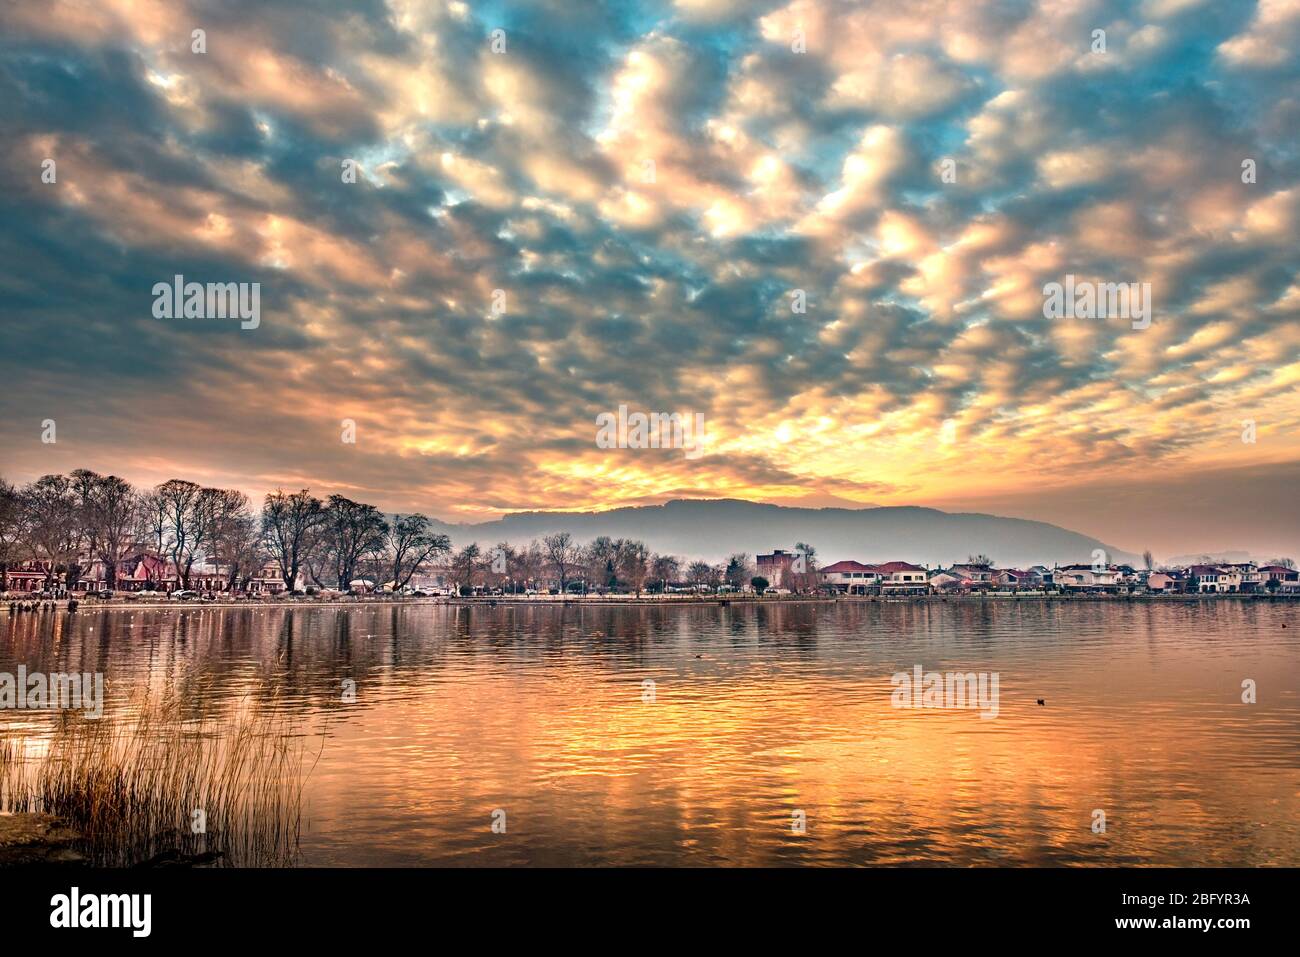 Dramatic sunset over the lake Pamvotis at Ioannina city in Greece Stock Photo